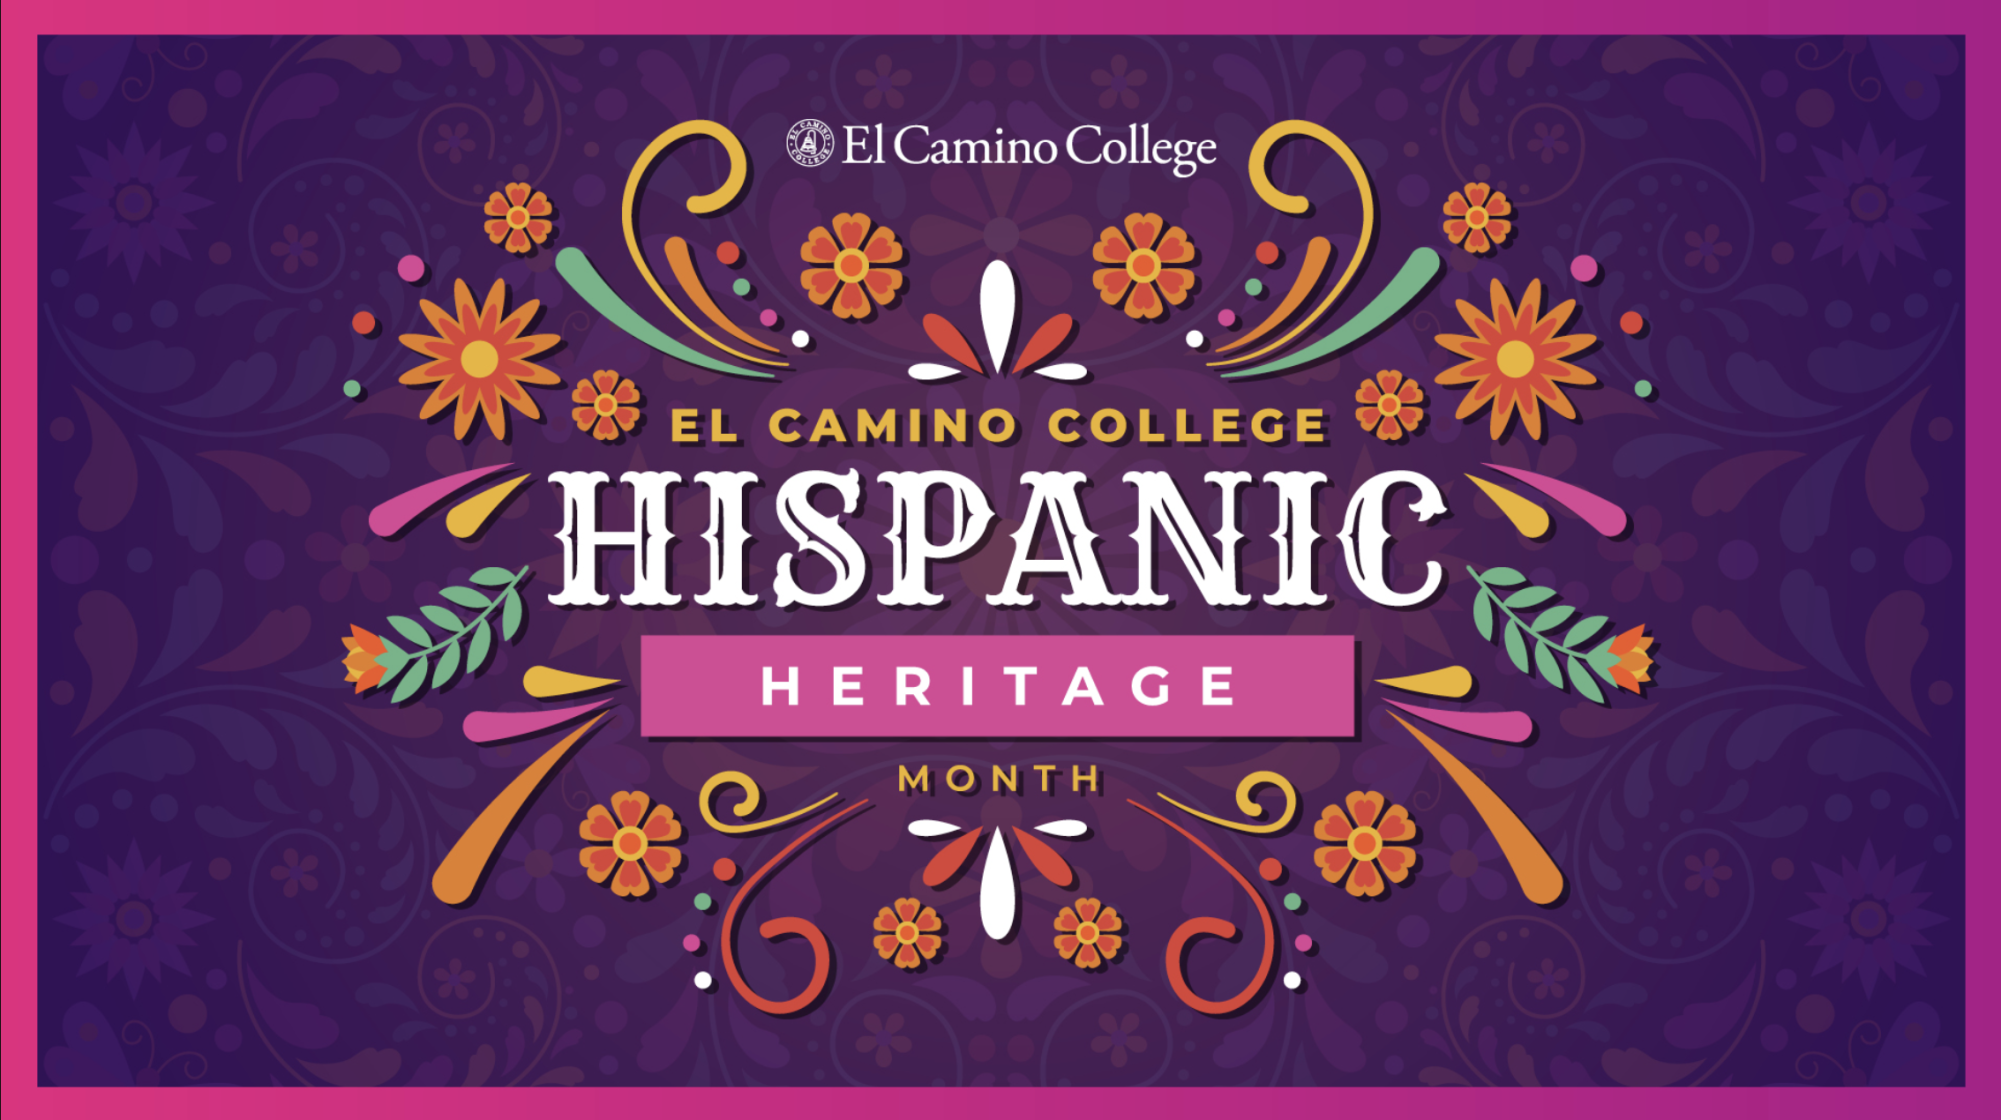 Screenshot from the El Camino College Hispanic Heritage Month webpage.